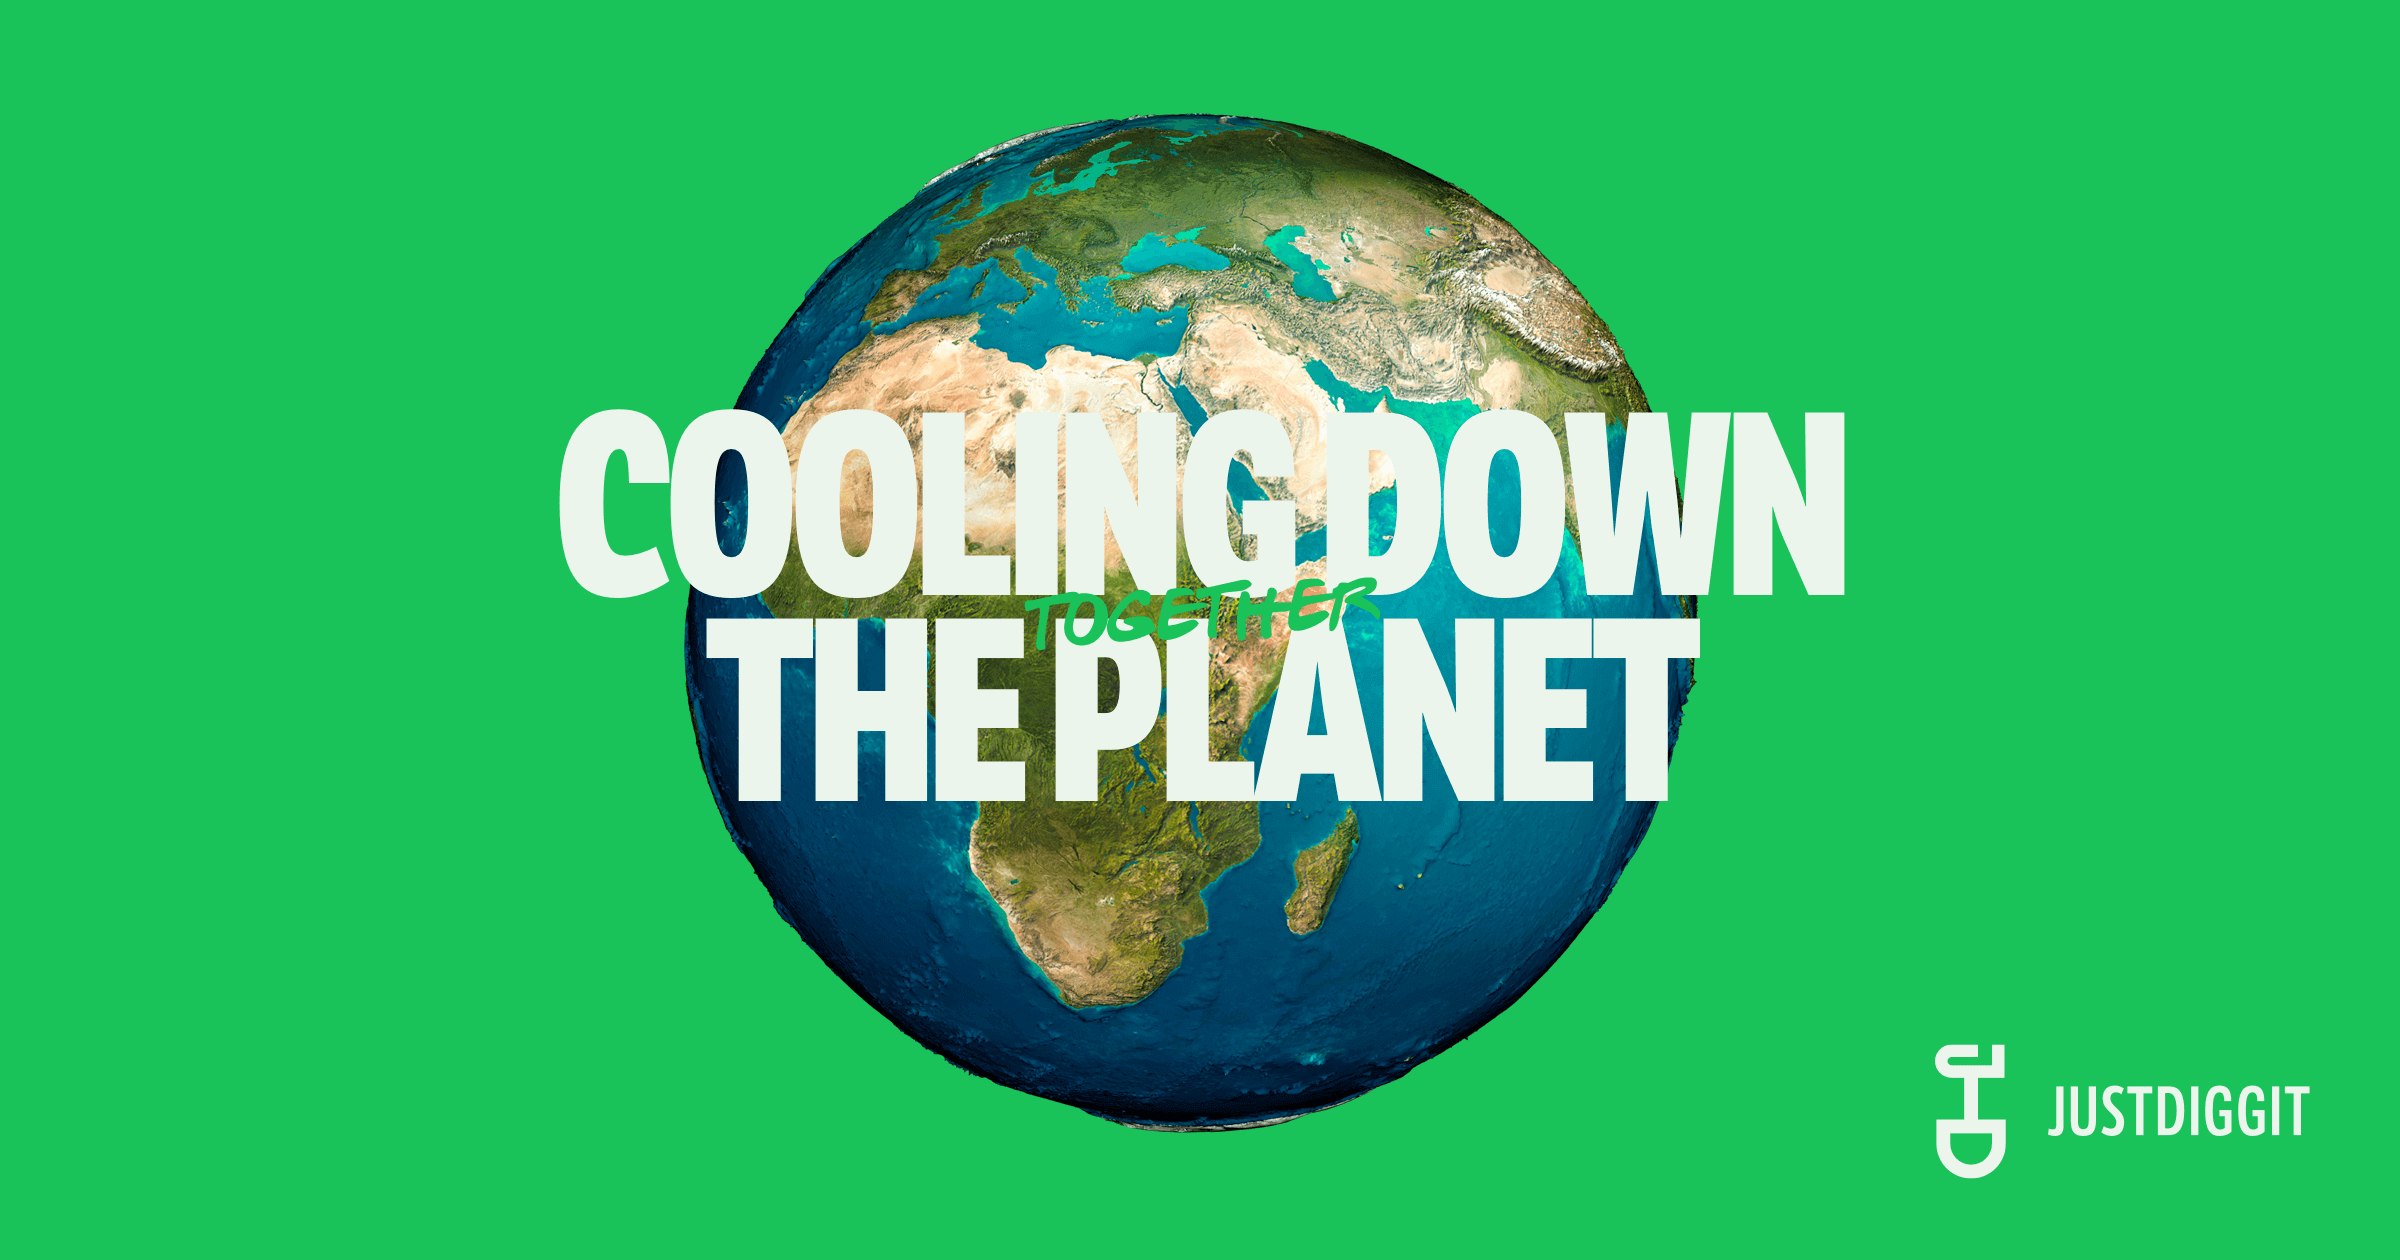 Justdiggit Cooling Down The Planet Global Warming Charity